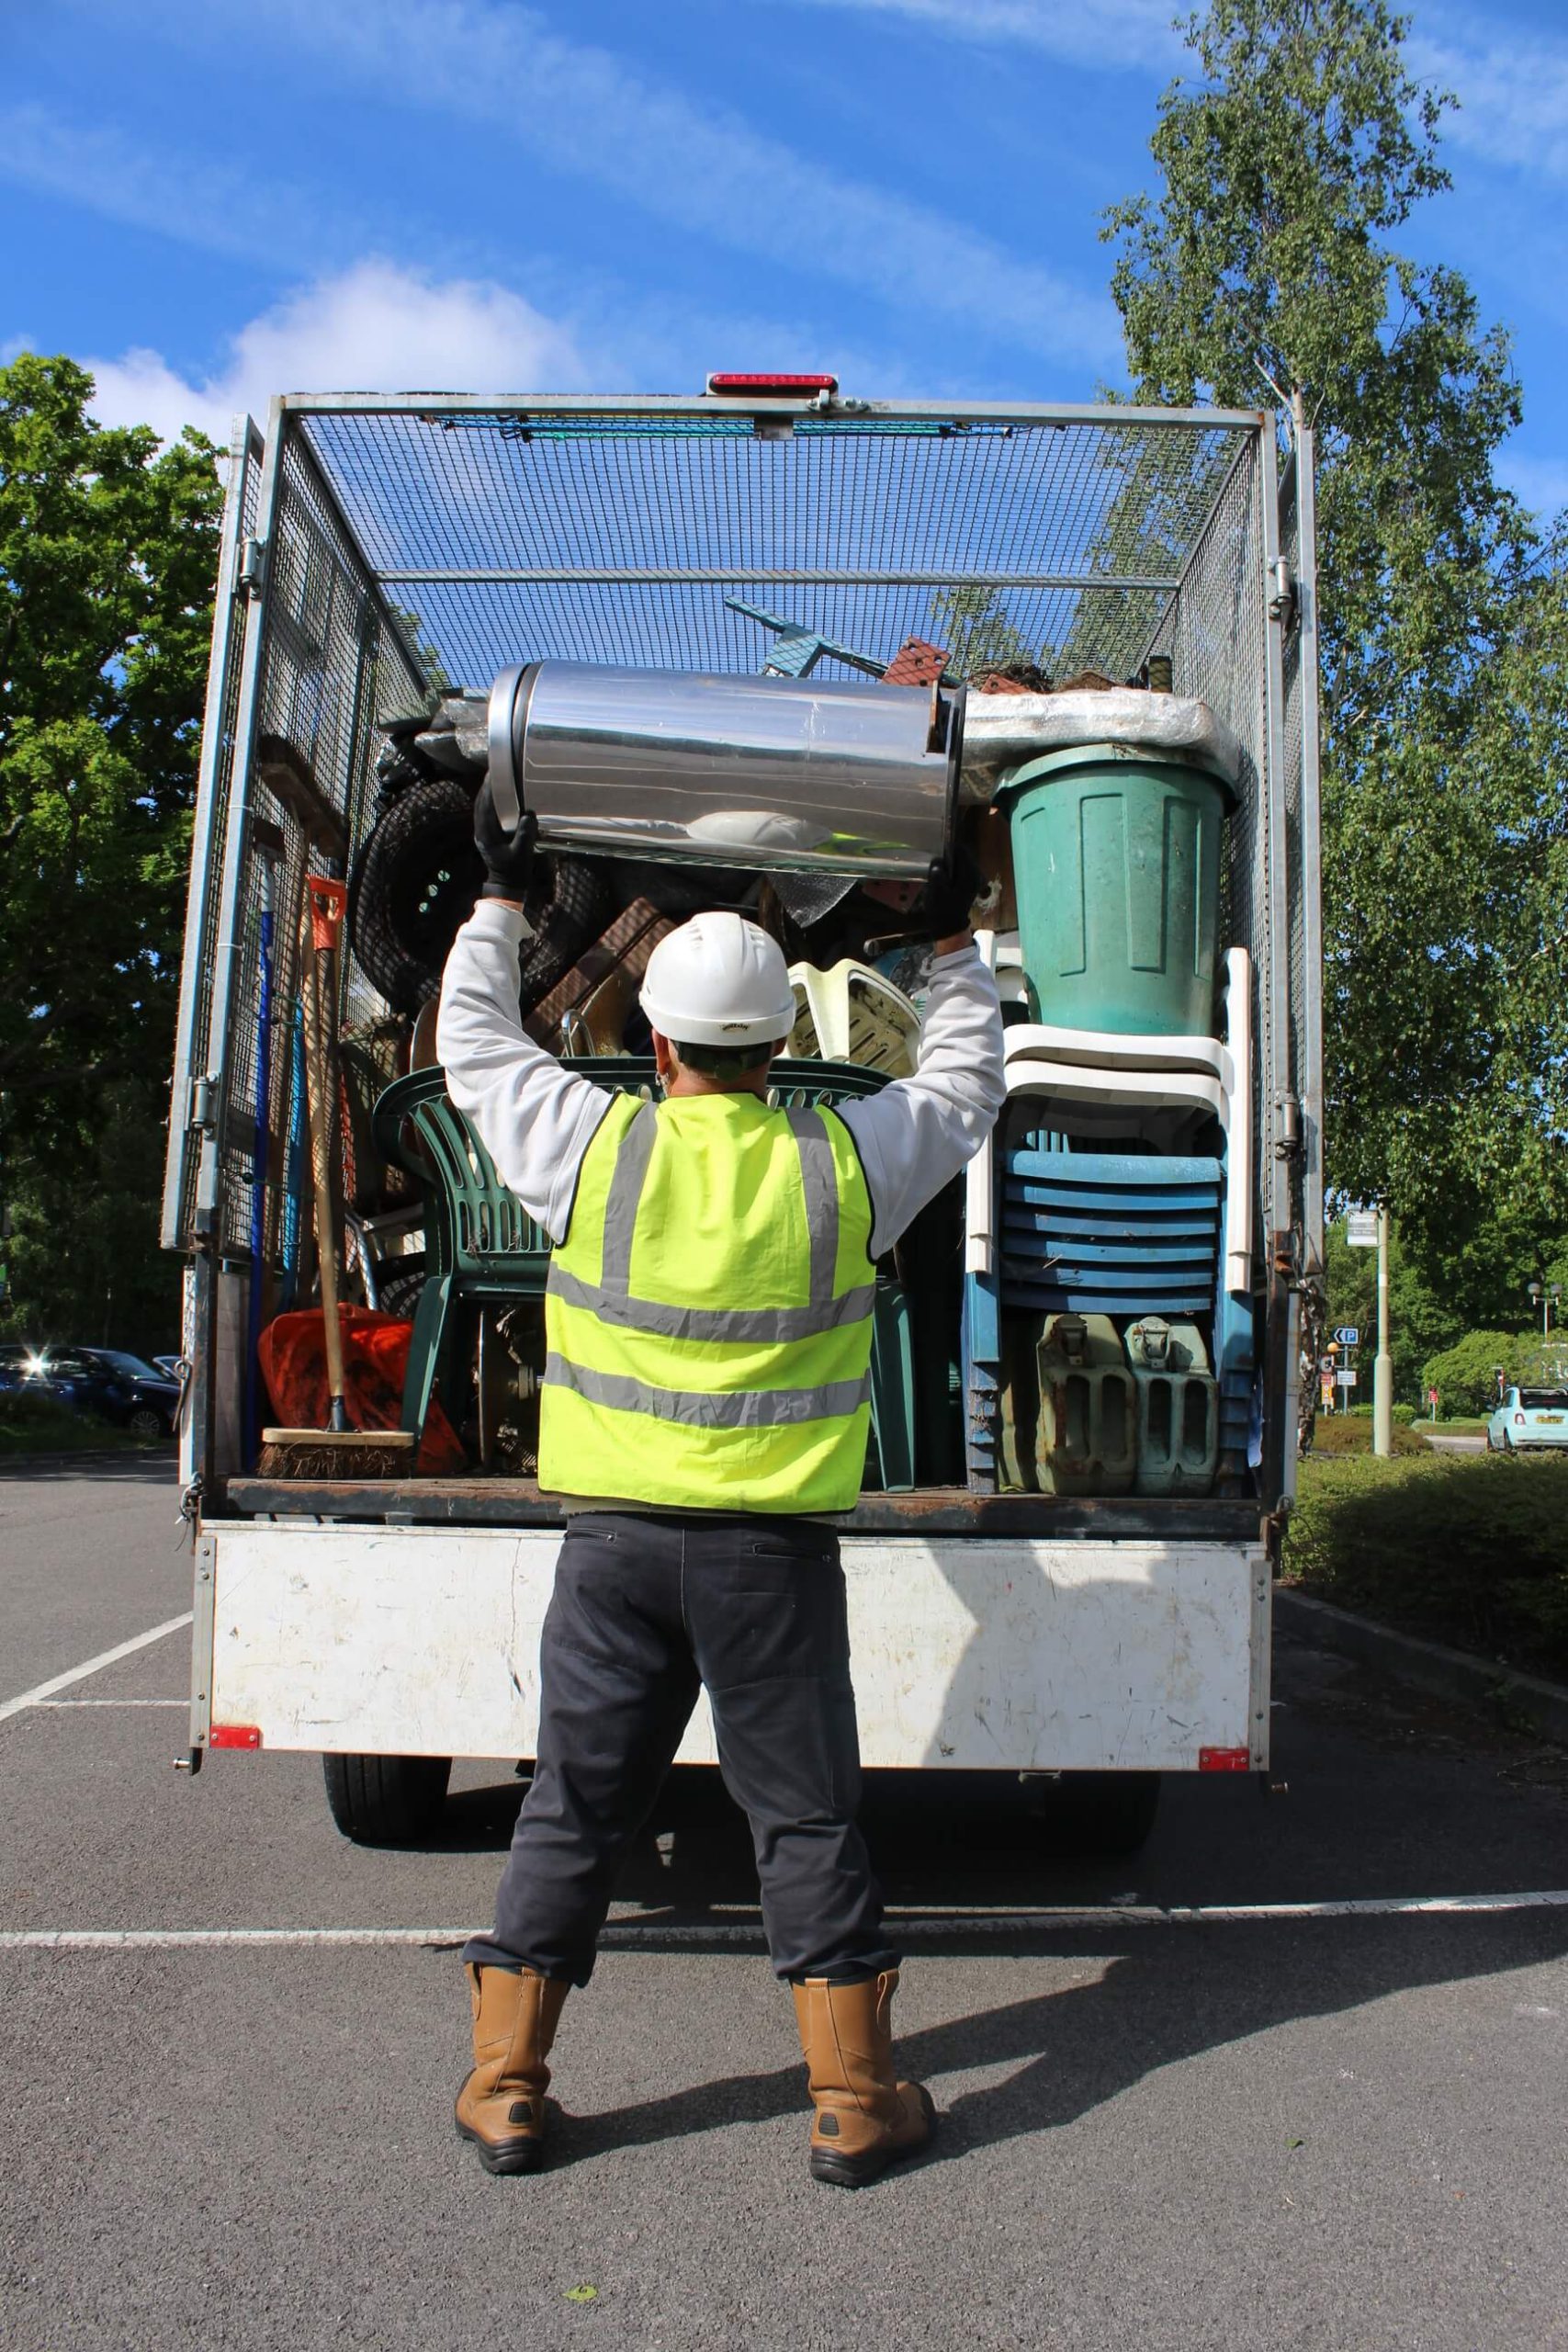 Waste Vehicle with men